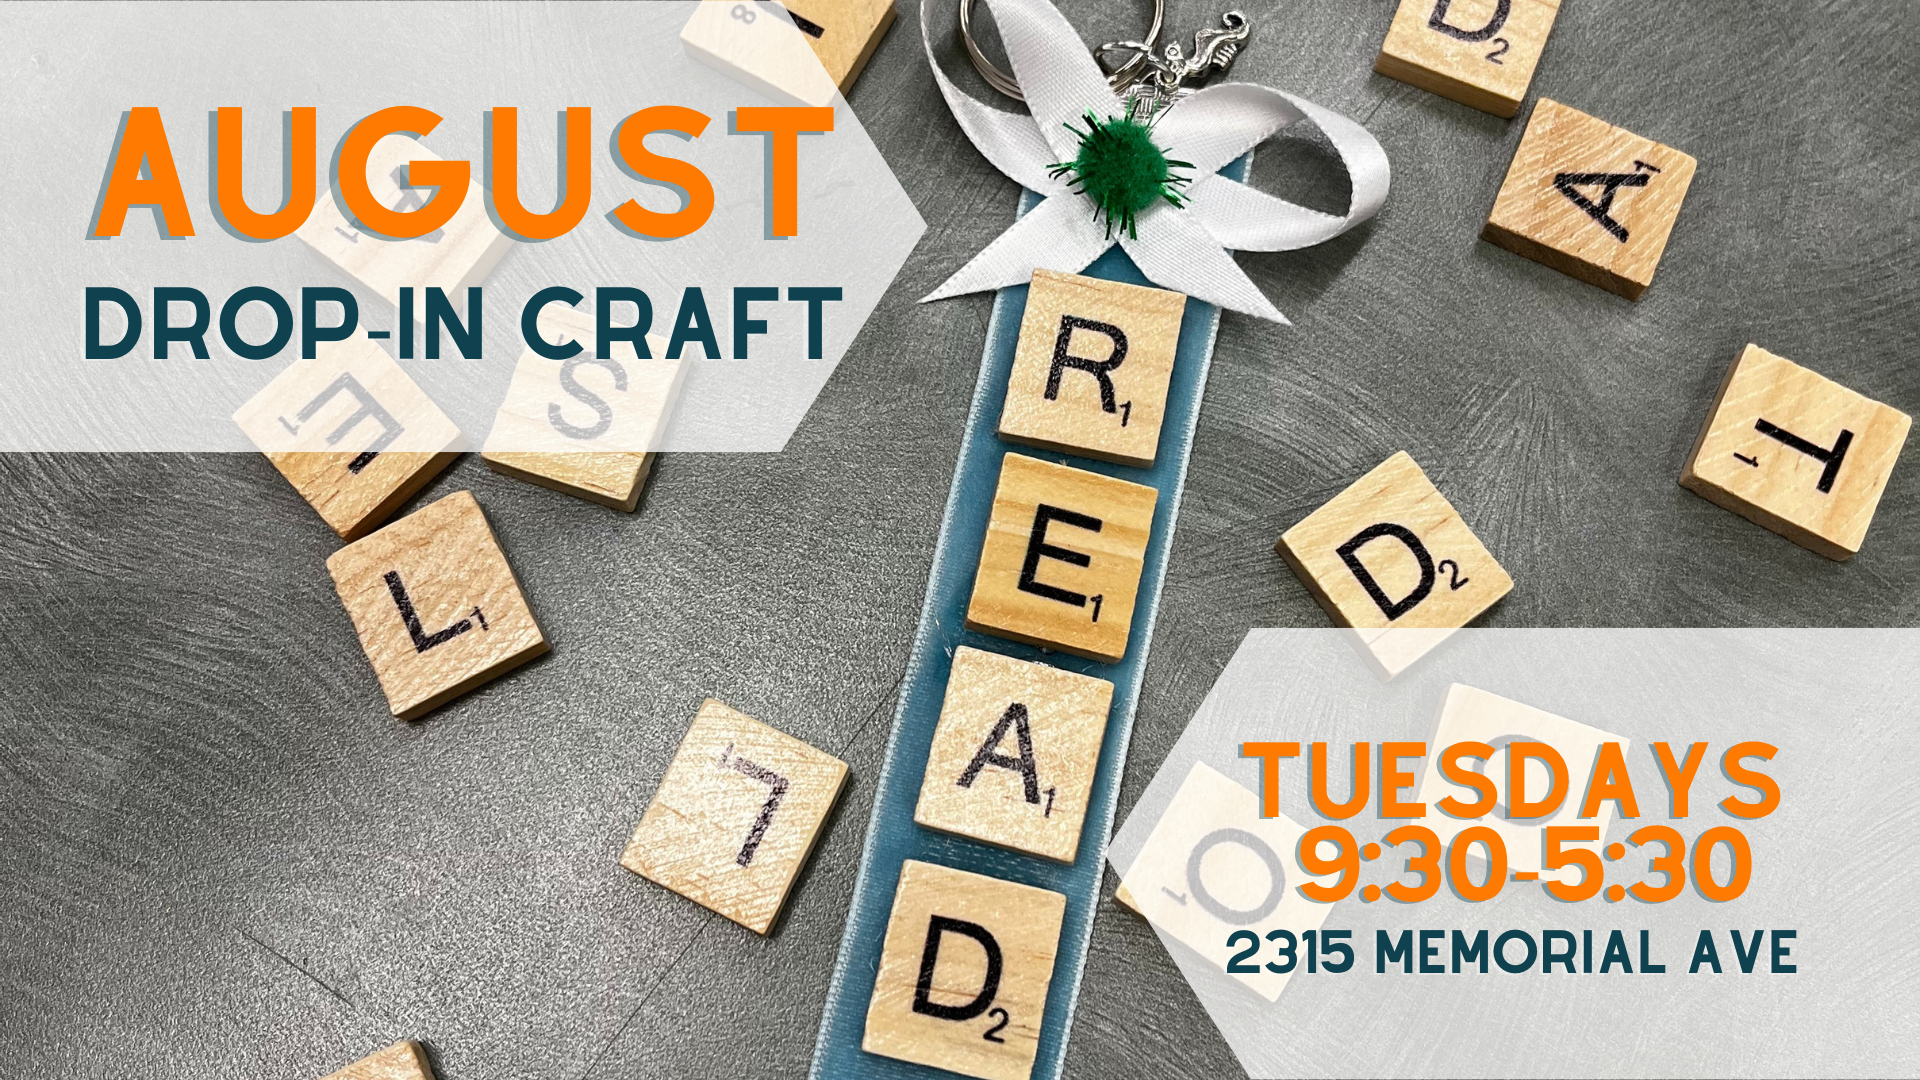 August Drop-In Craft, Tuesdays, 9:30-5:30, 2315 Memorial Ave